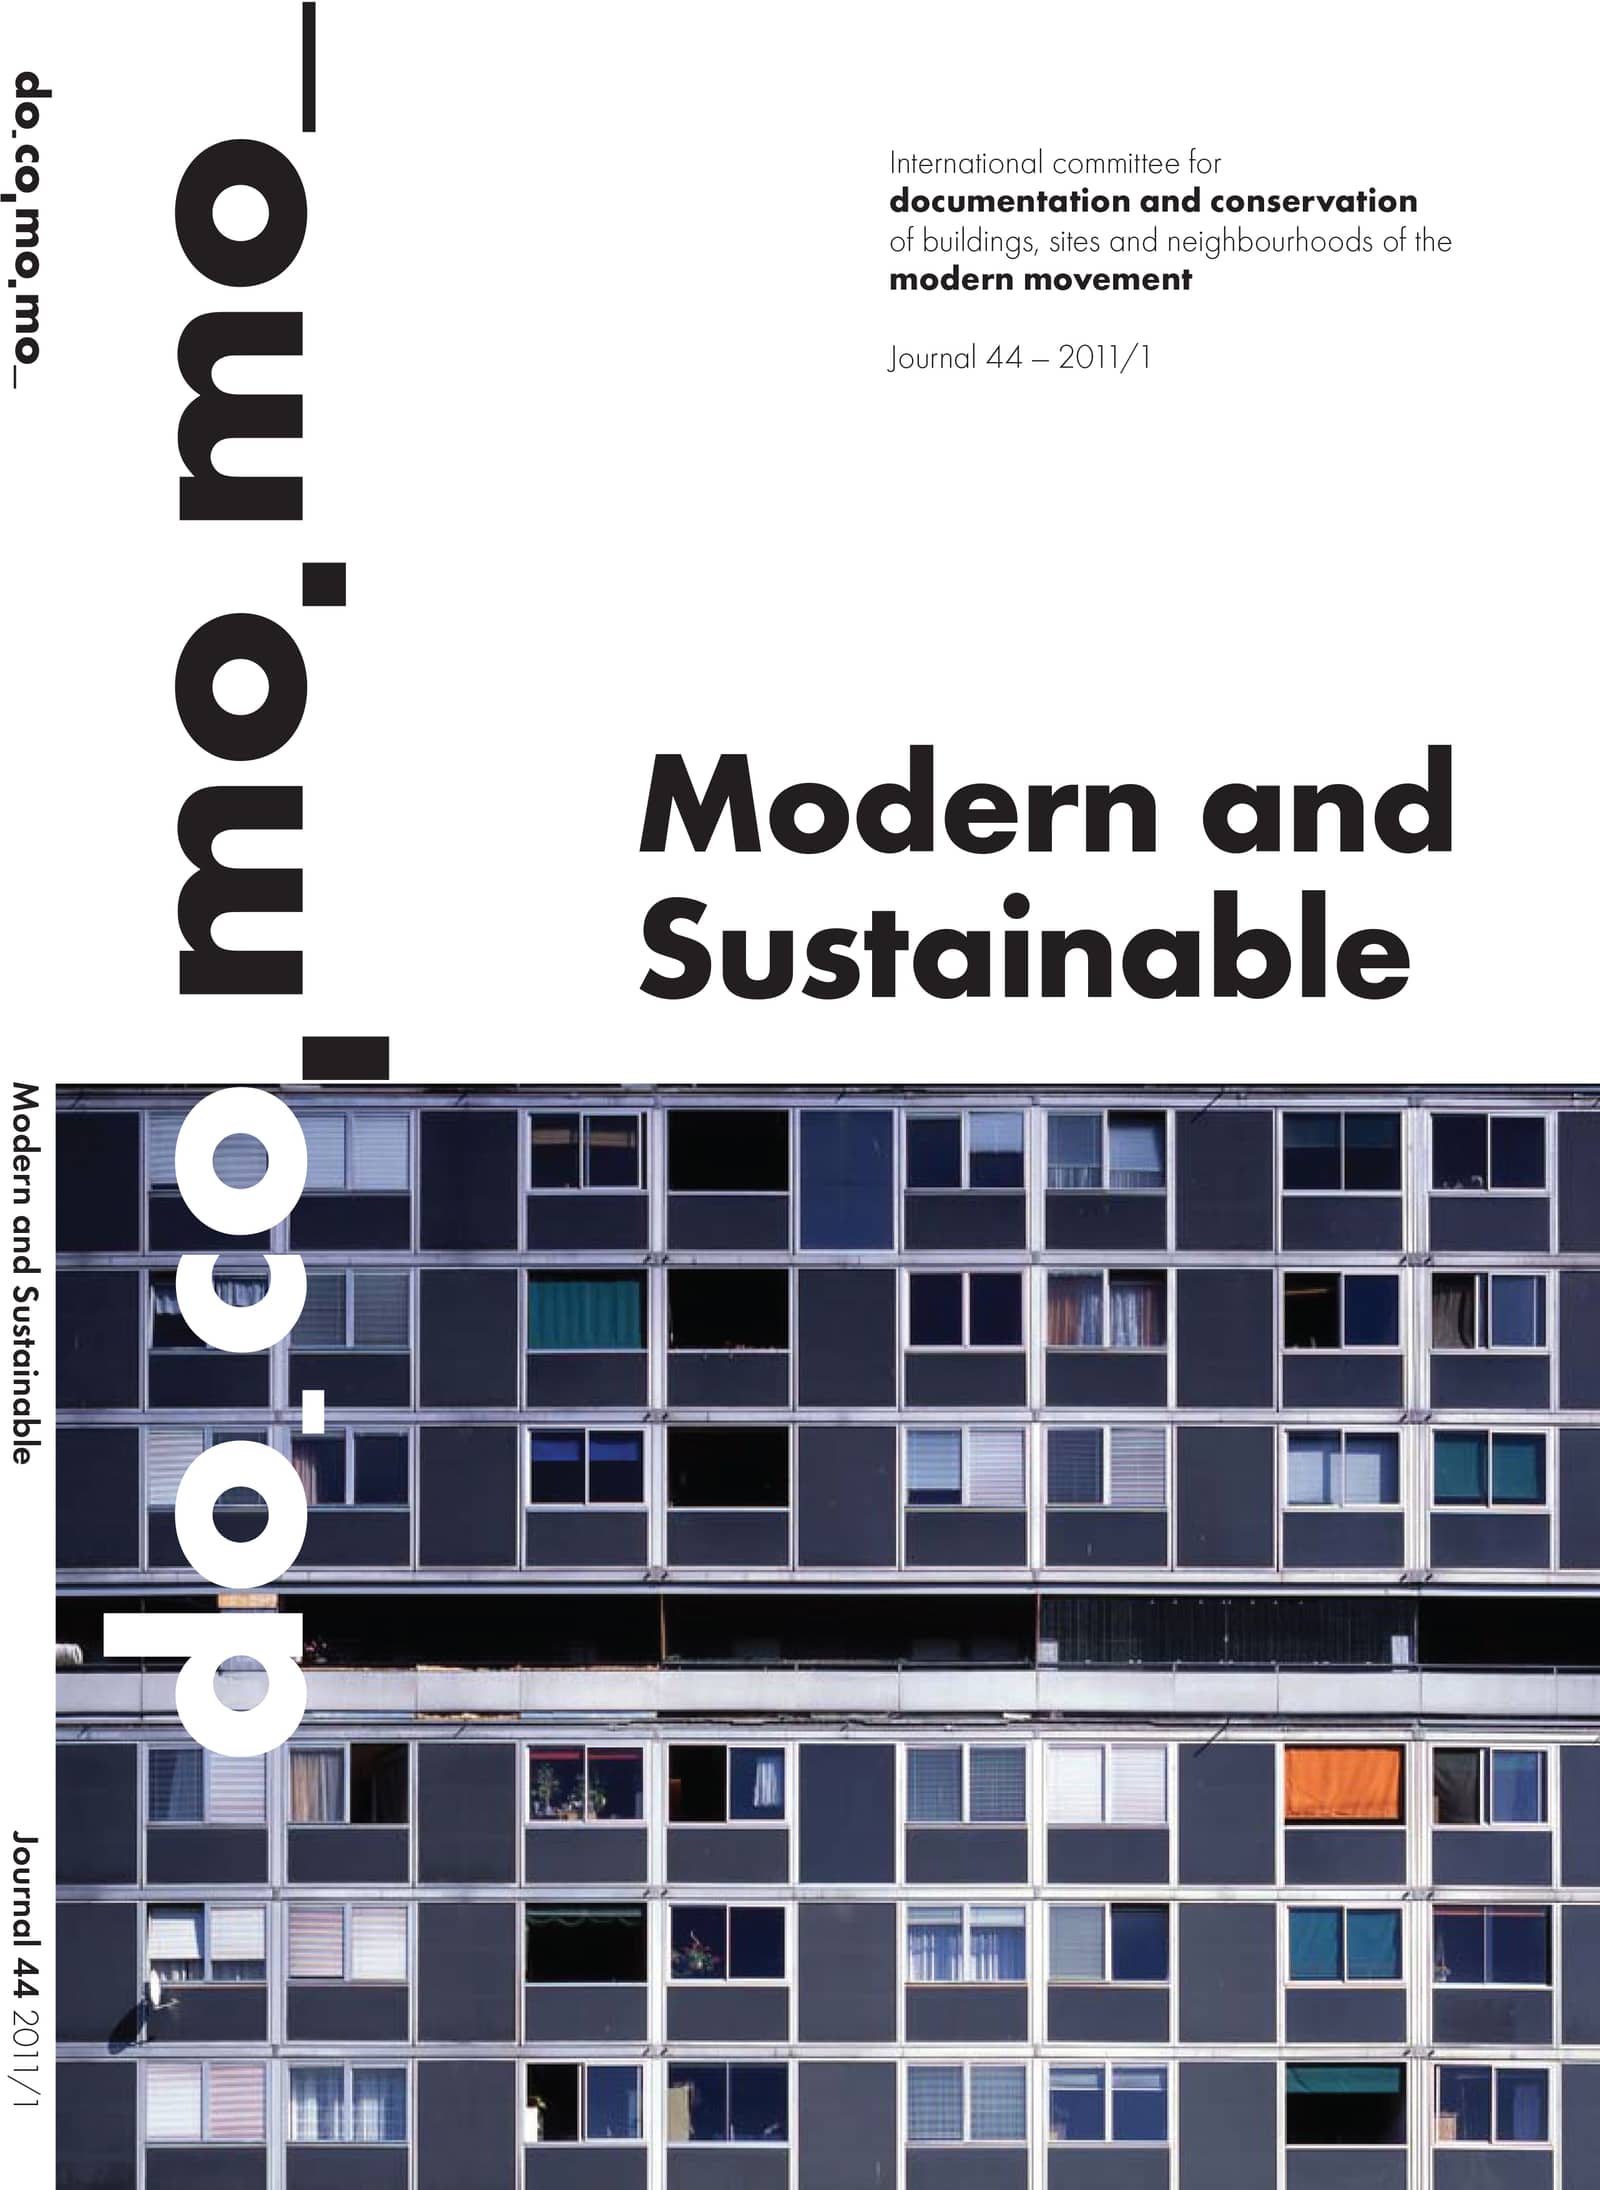 						View No. 44 (2011): Modern and Sustainable
					